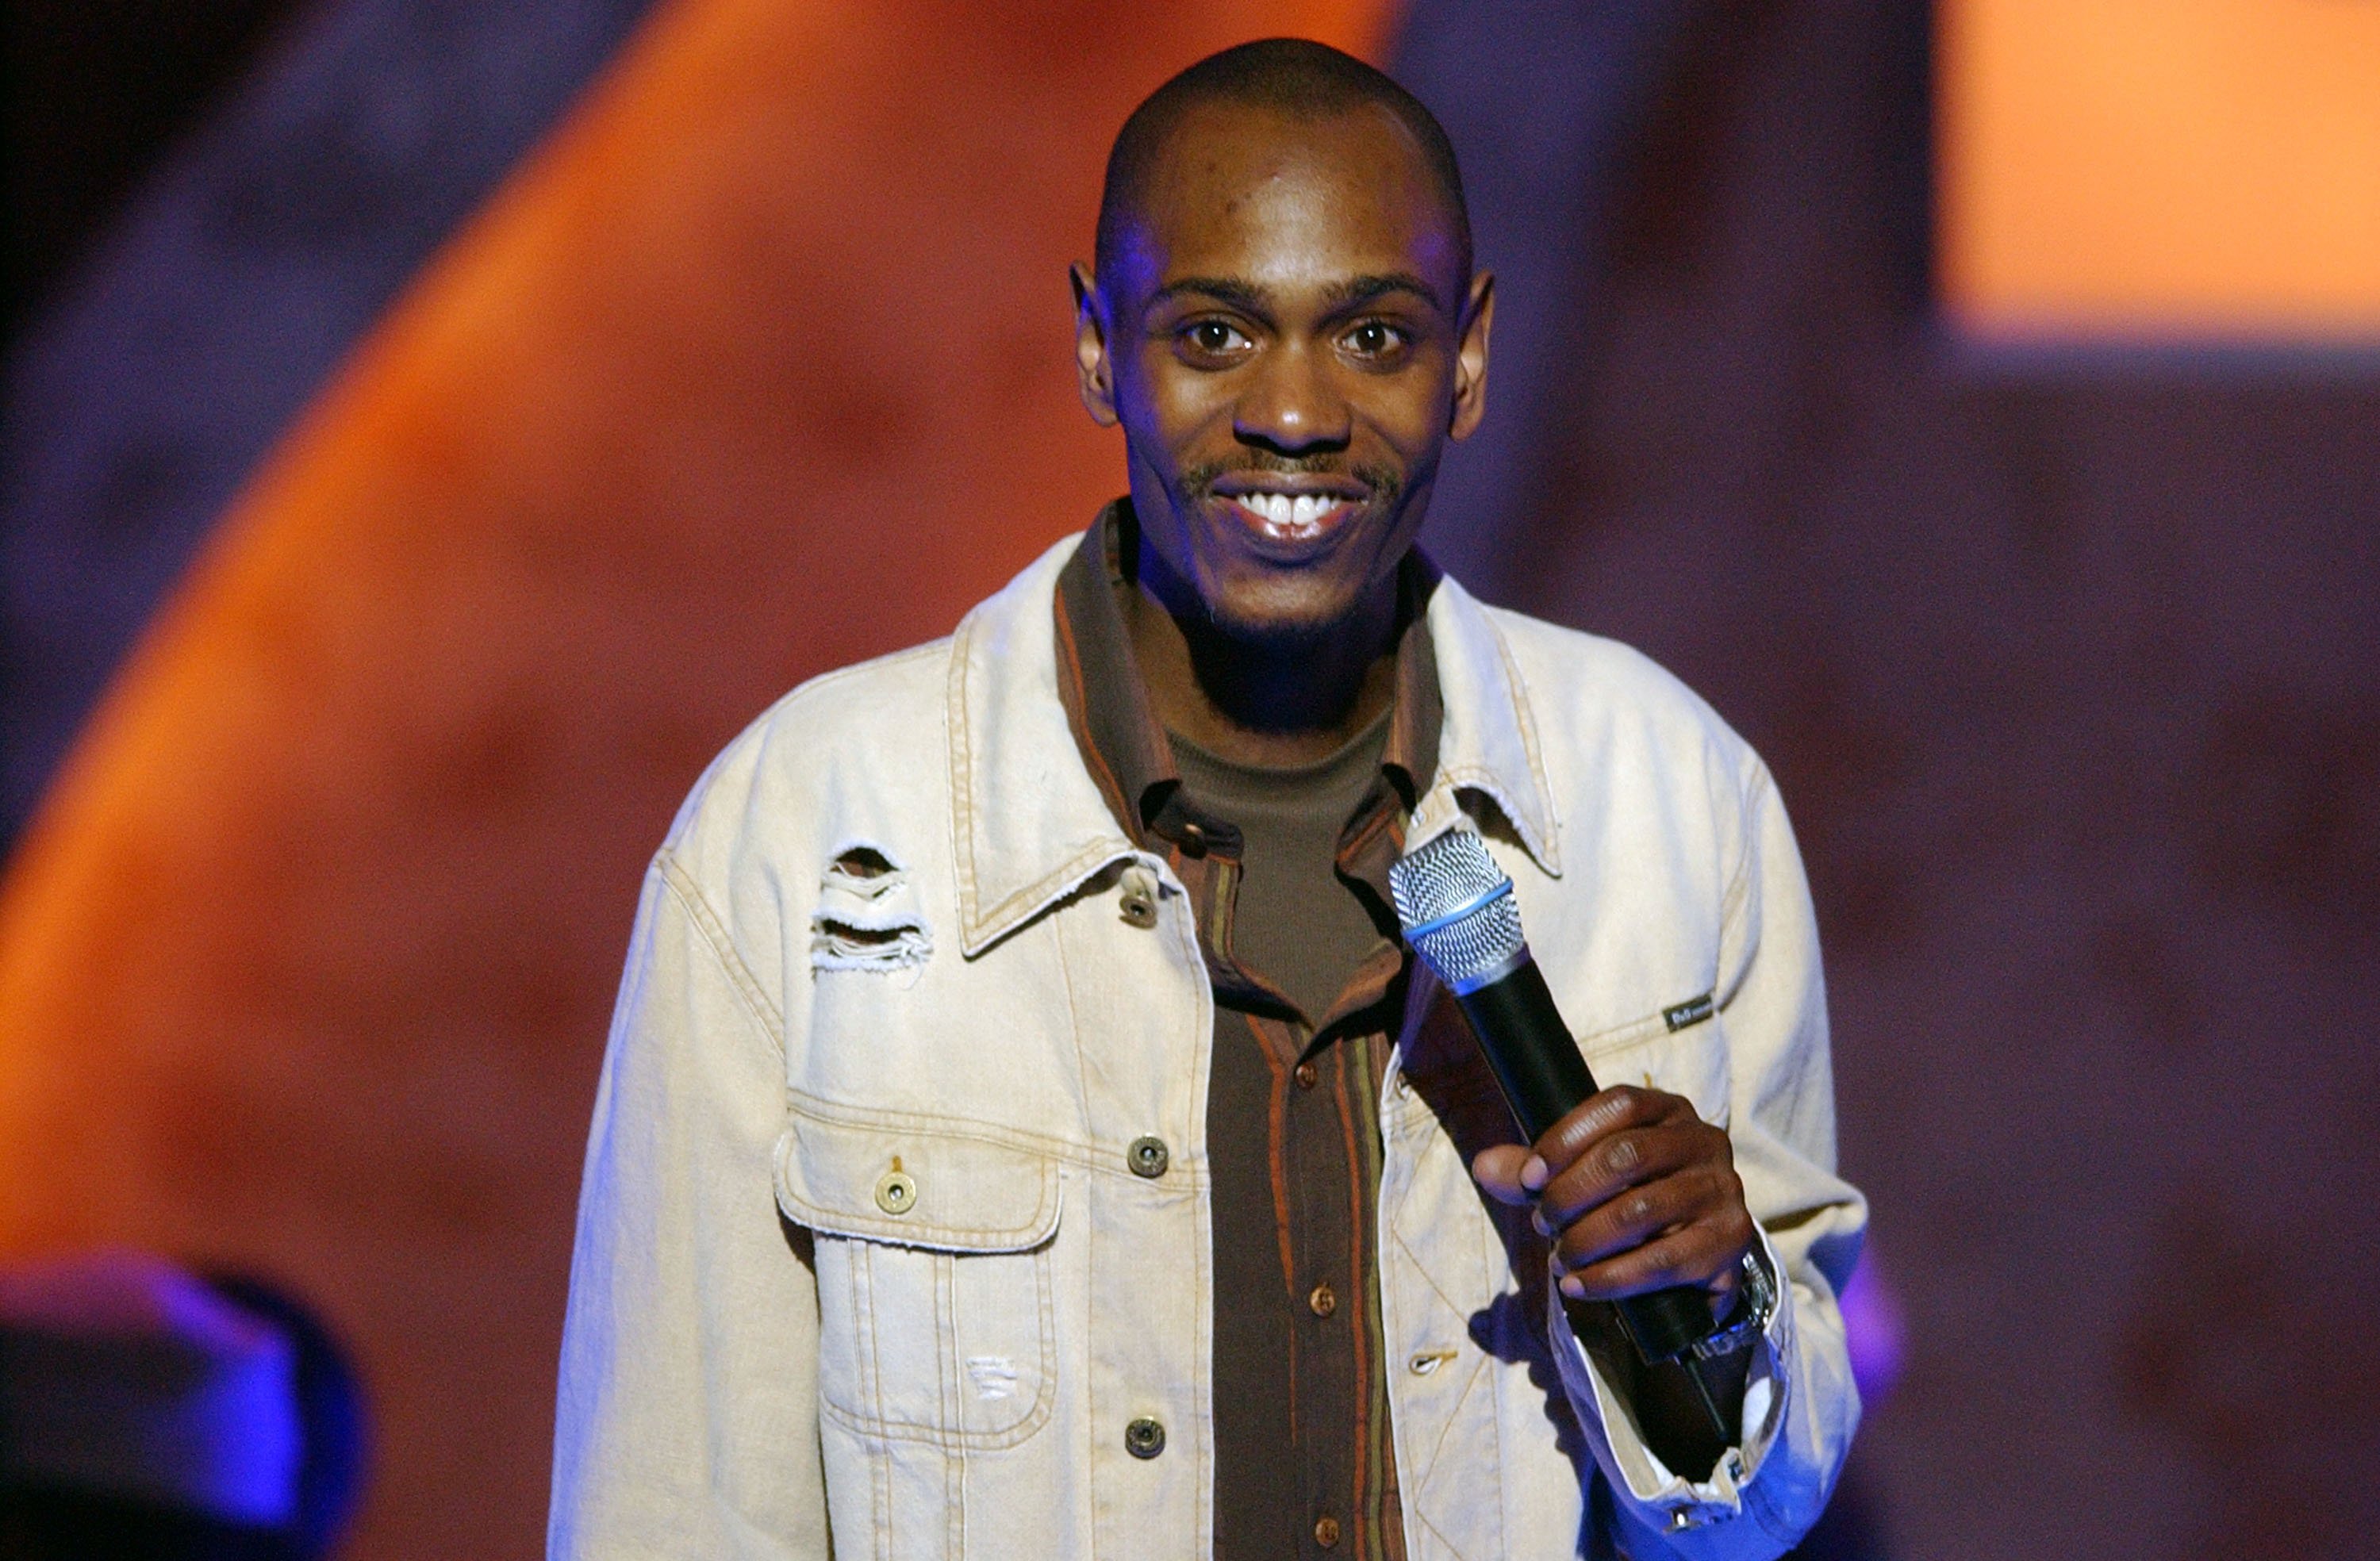 Dave Chappelle in a white jacket onstage in 2003.